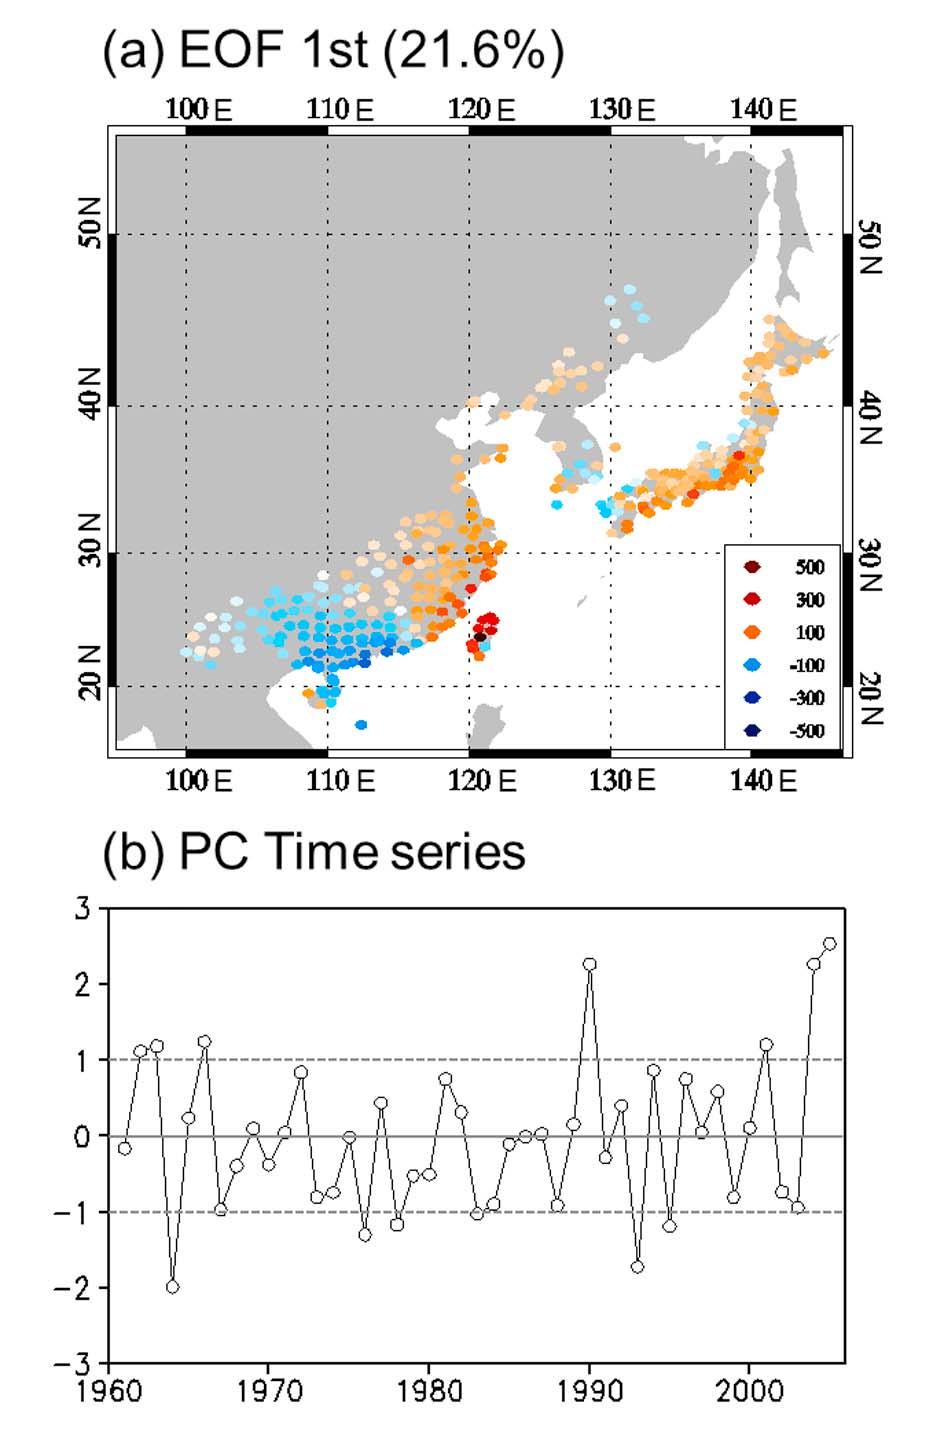 station to produce the station-based TC-induced heavy rainfall data. Figure 1. (a) Eigenvector and (b) normalized PC time series of the 1st EOF mode of TC-induced heavy rainfall over East Asia.